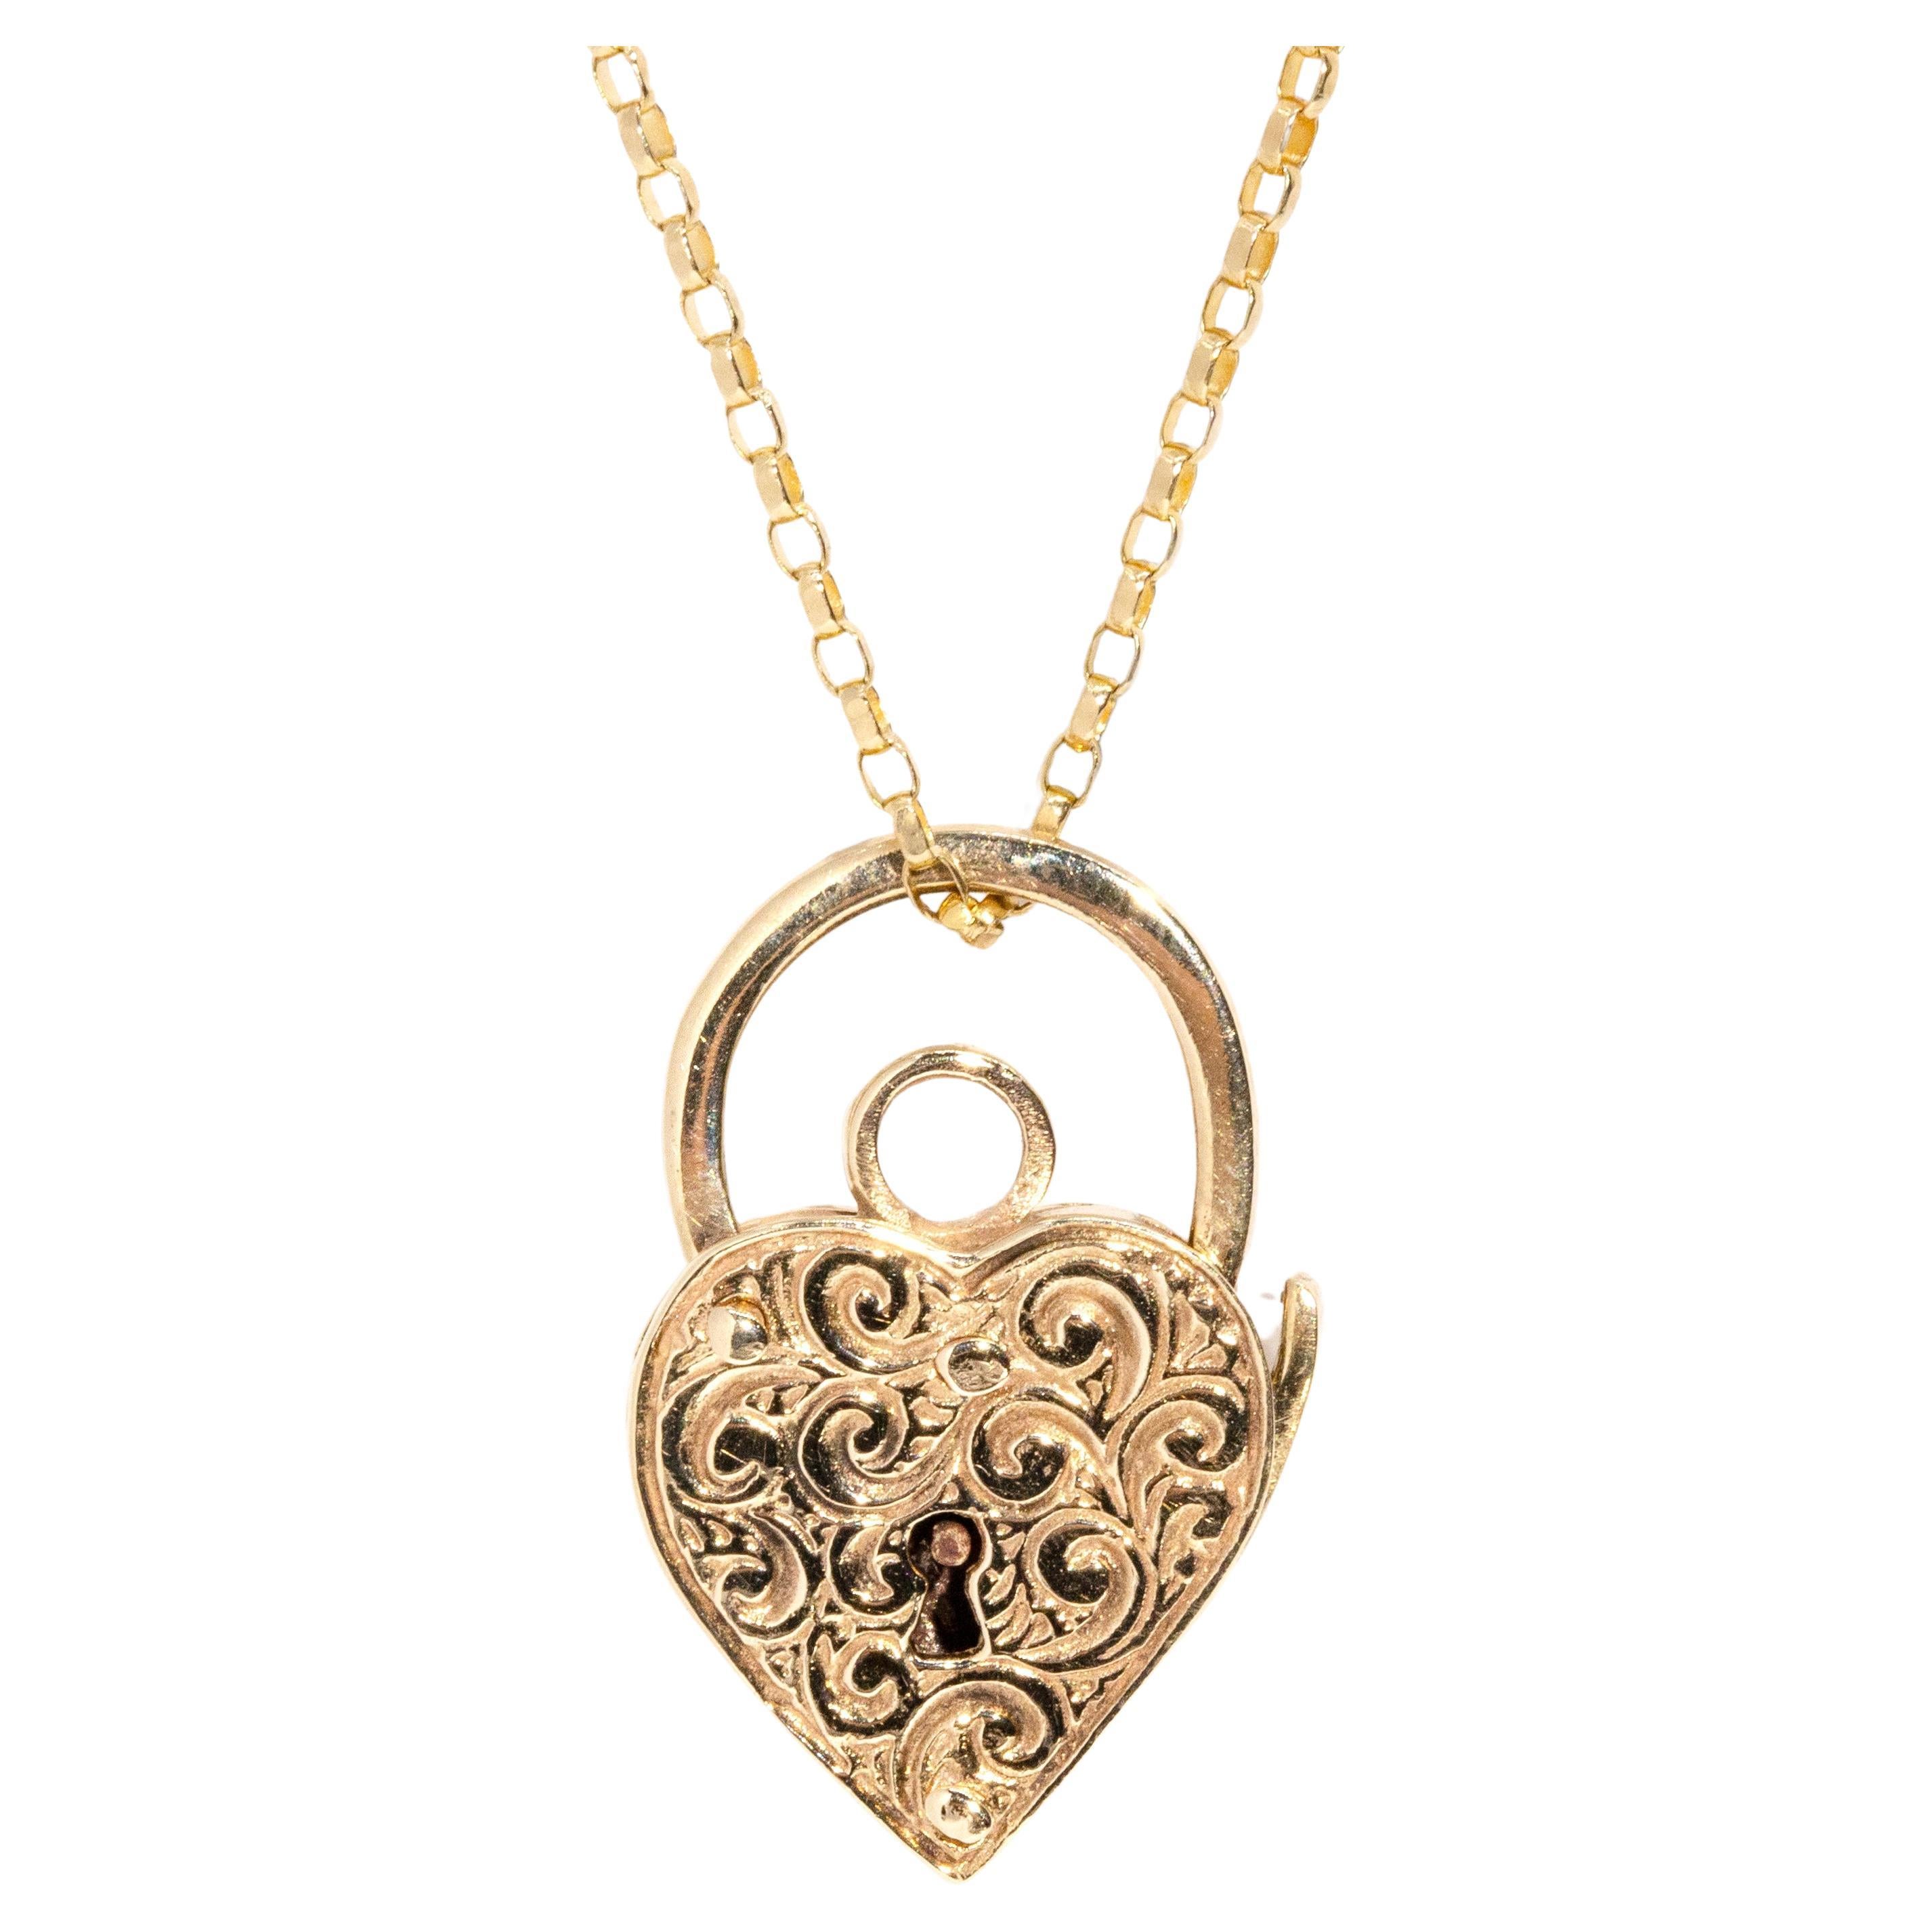 Vintage Circa 1960s Patterned Heart Padlock Pendant & Chain 9 Carat Yellow Gold For Sale